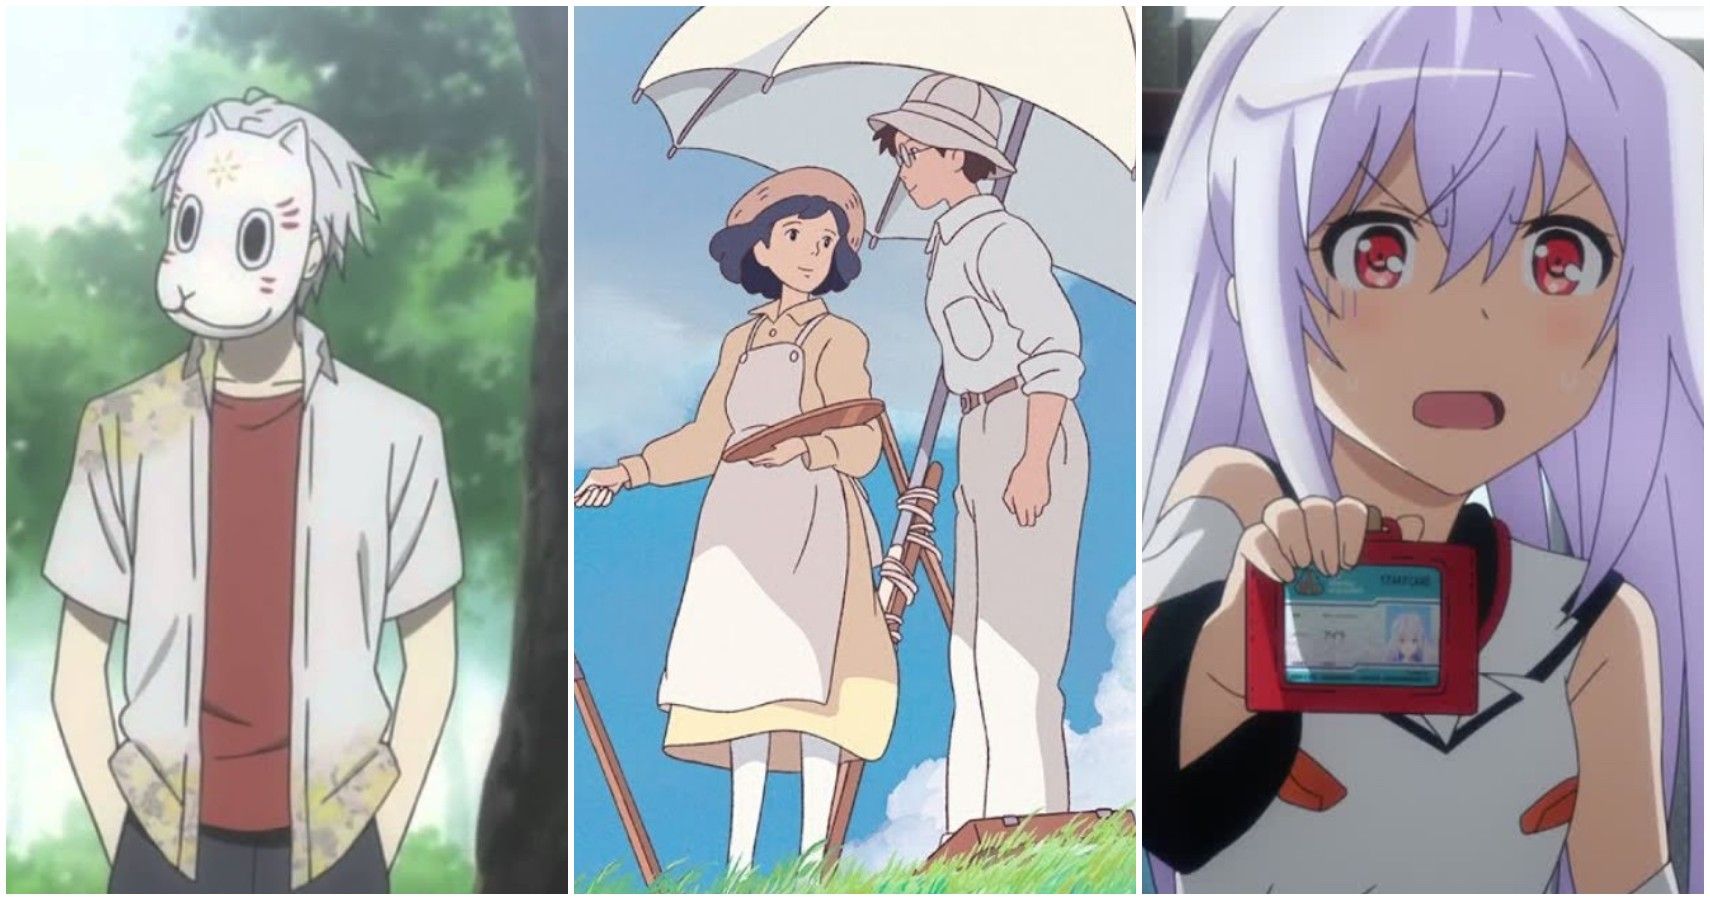 10 Romance Anime That Will Make You Cry, According To MyAnimeList